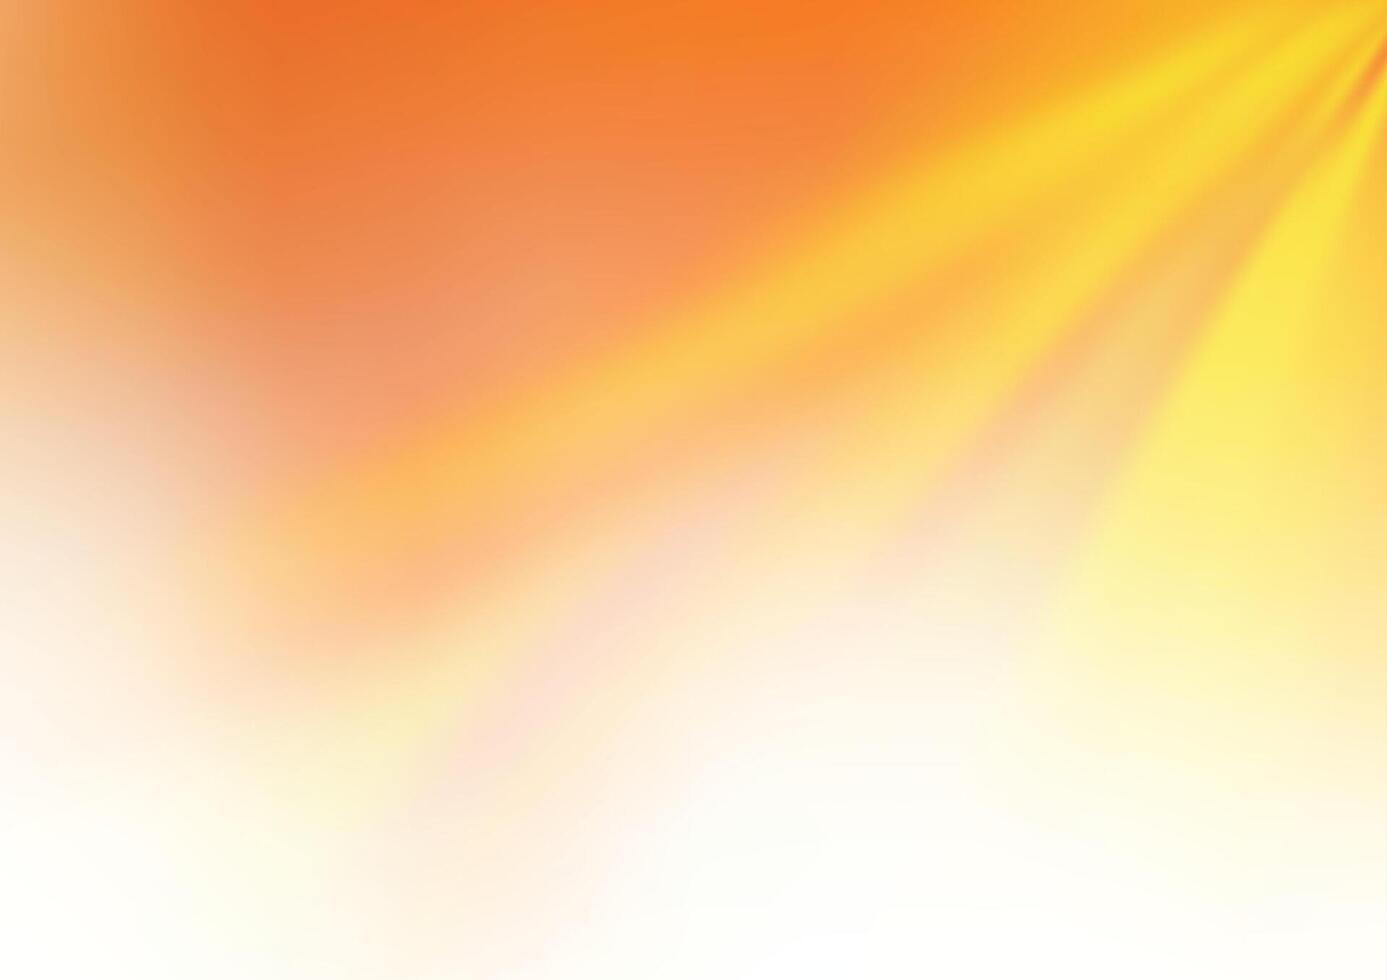 Light Yellow, Orange vector abstract background.